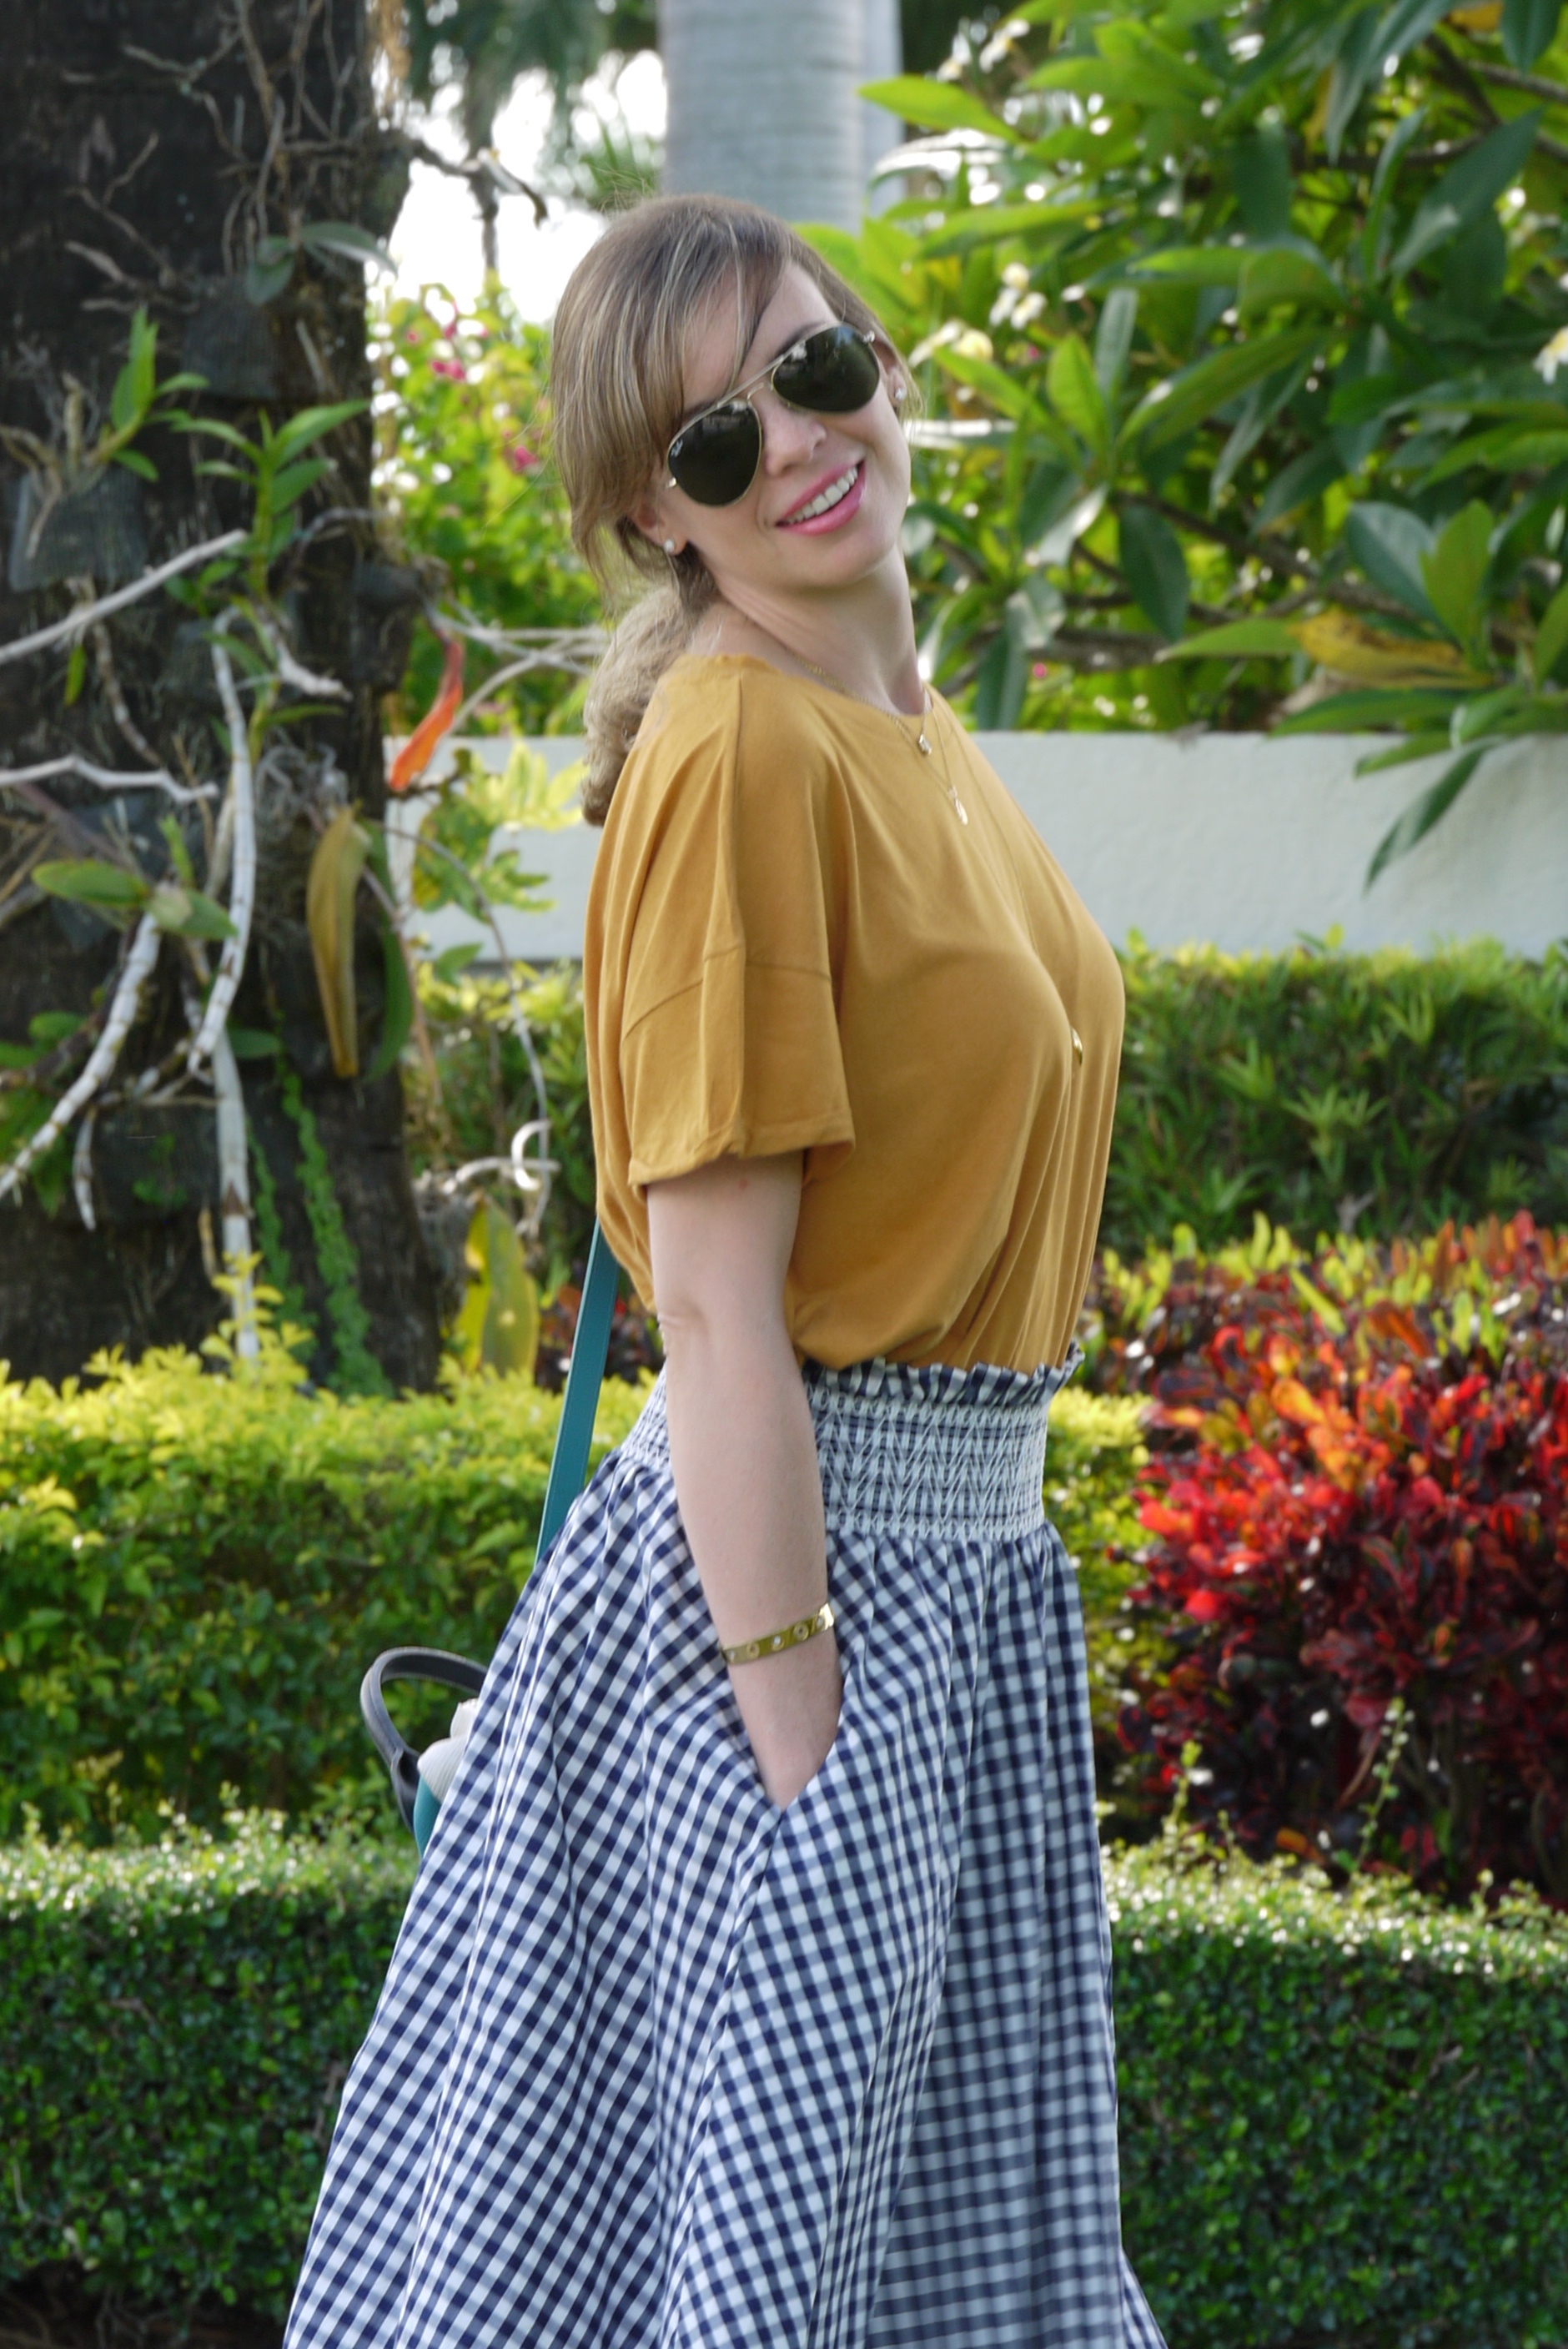 gingham skirt with mustard tee and flat satin sandals by mylovelypeople